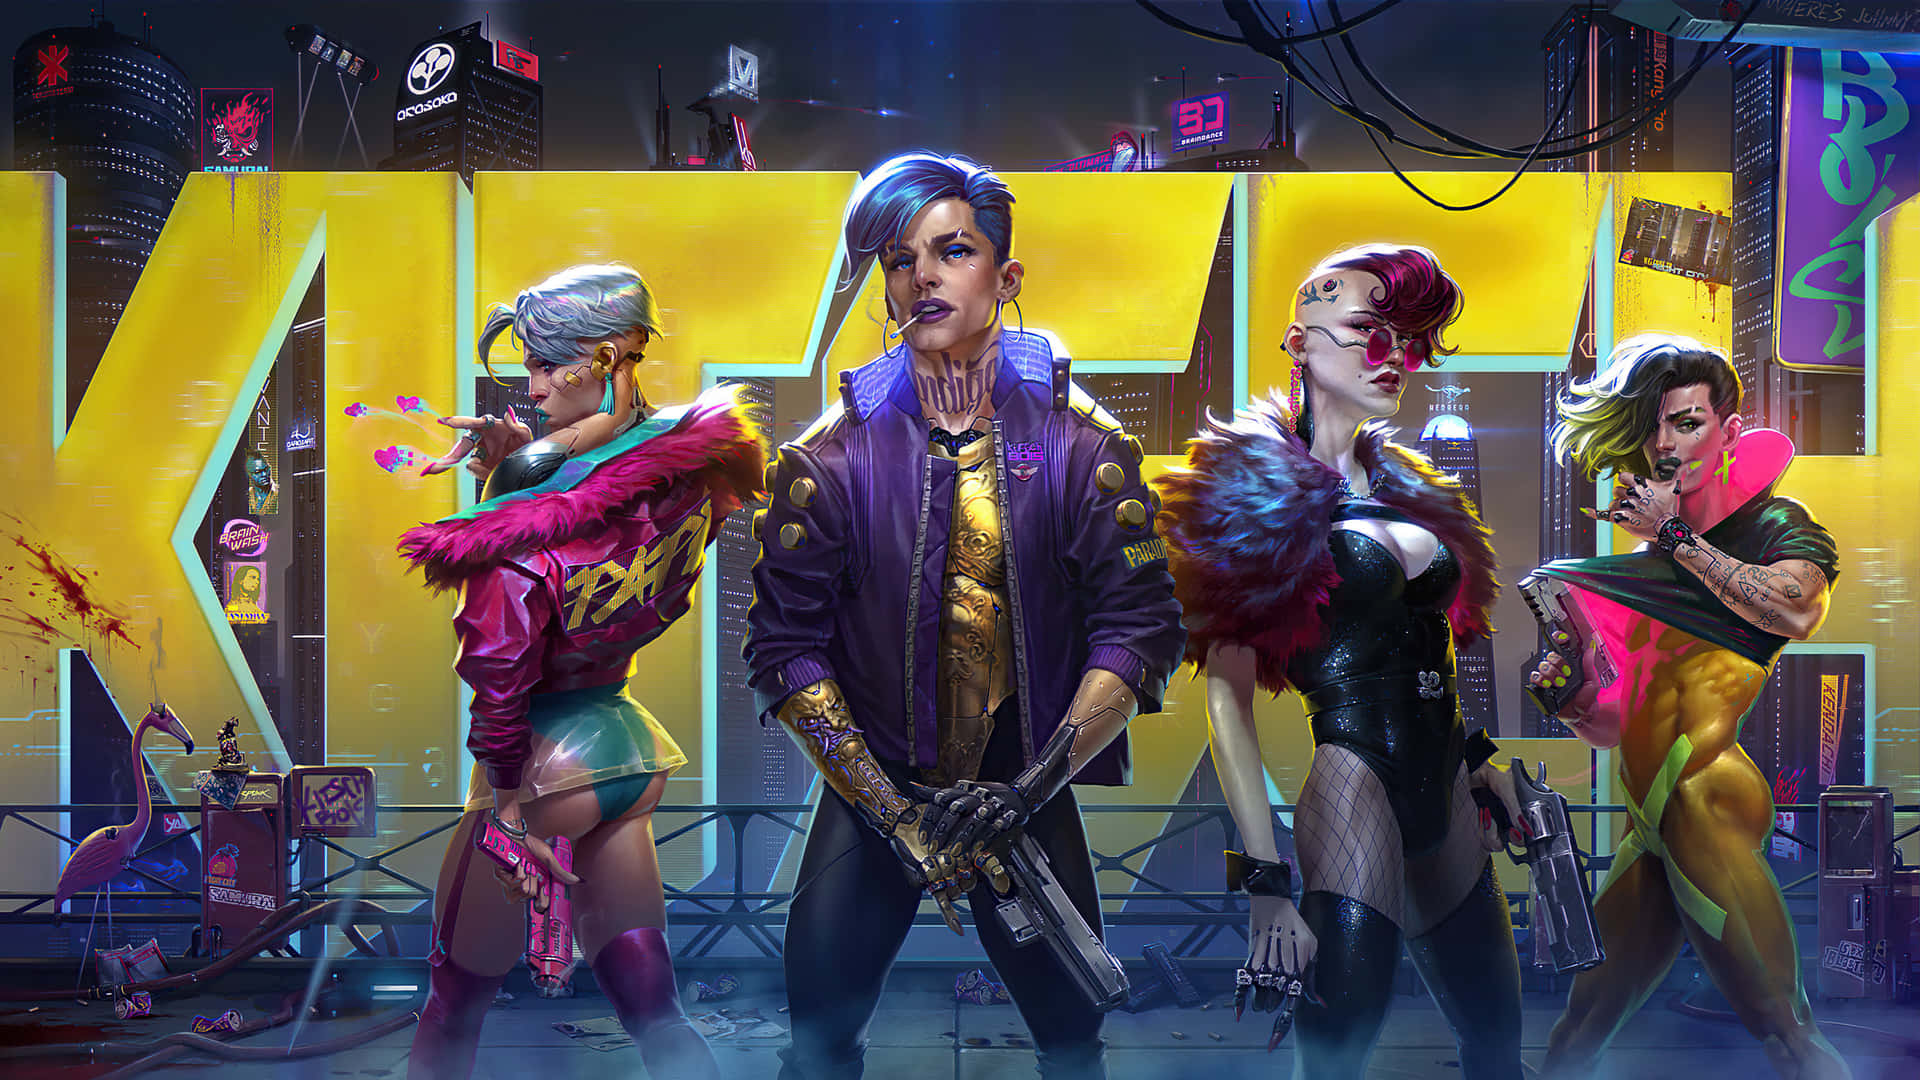 V, The Protagonist Of Cyberpunk 2077 In Night City Action Wallpaper